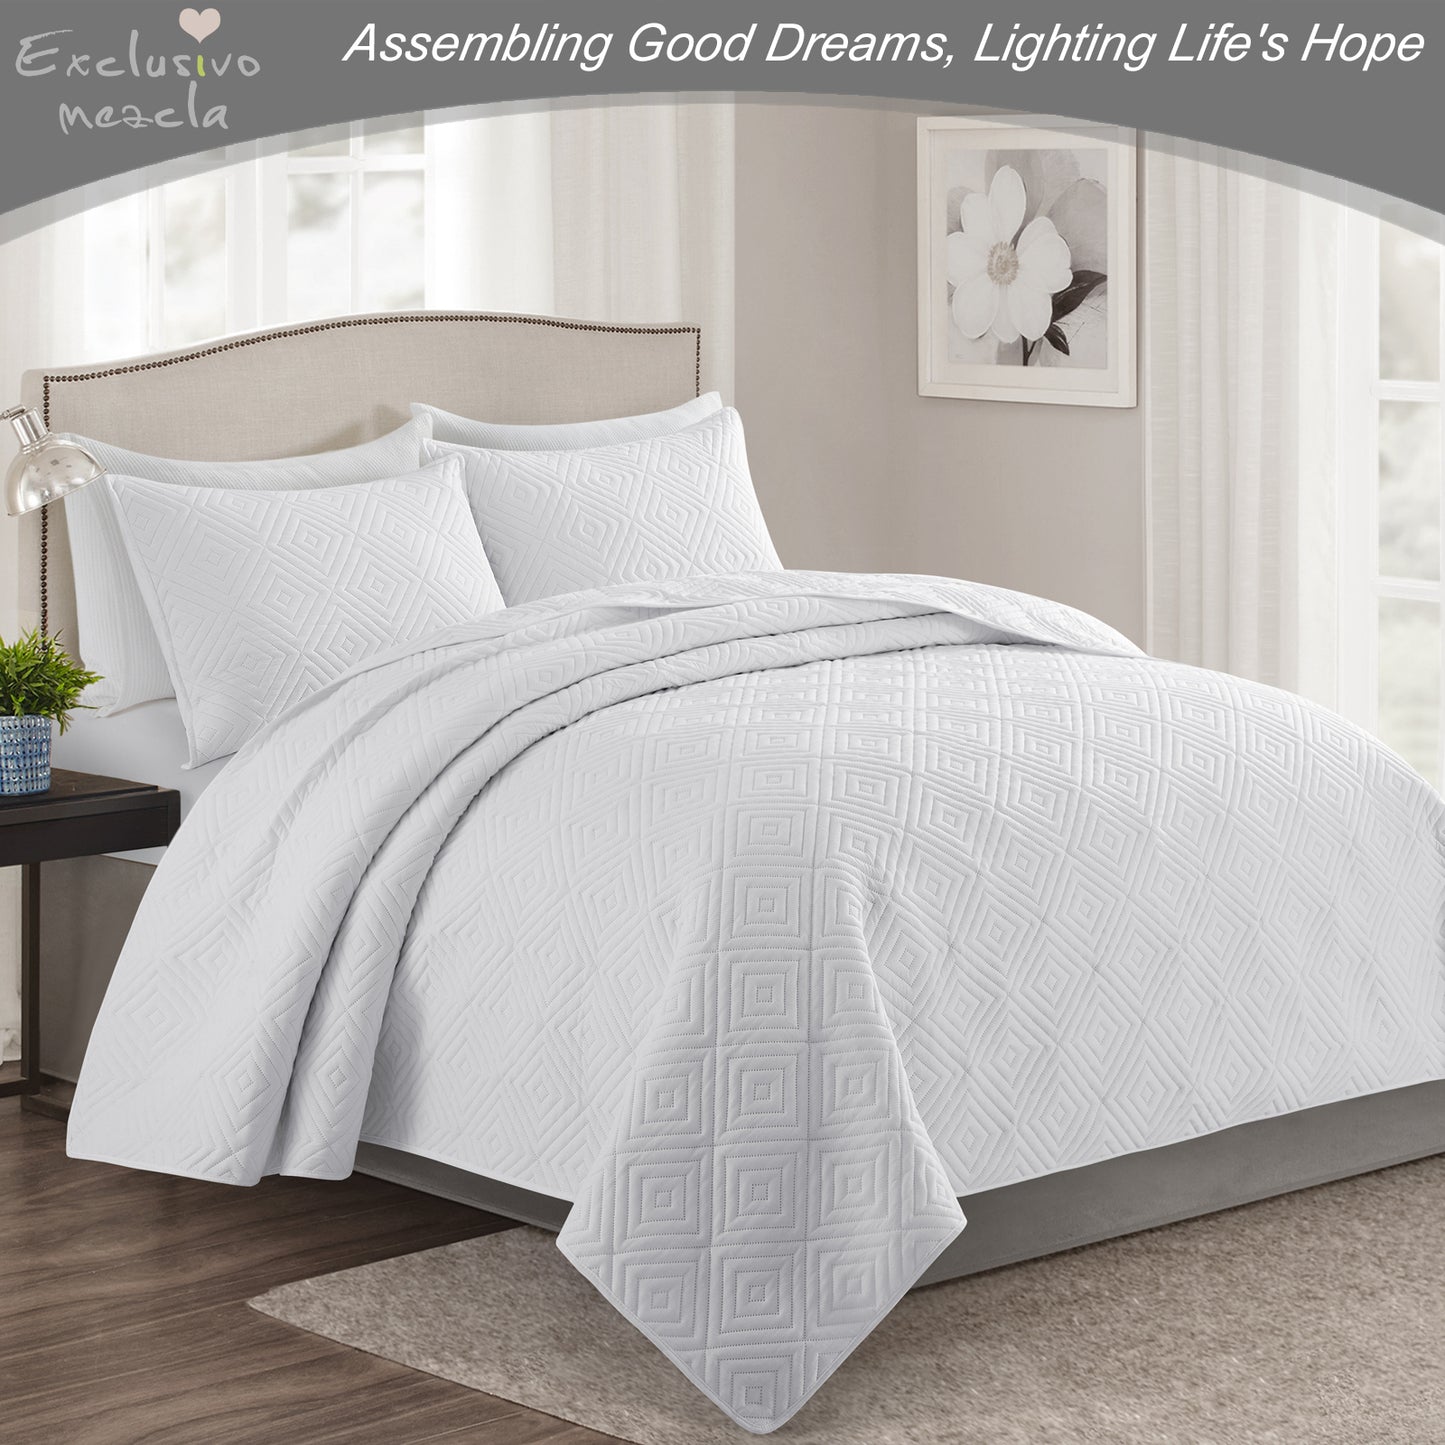 Exclusivo Mezcla 2-Piece White Twin Size Quilt Set, Square Pattern Ultrasonic Lightweight and Soft Quilts/Bedspreads/Coverlets/Bedding Set (1 Quilt, 1 Pillow Sham) for All Seasons